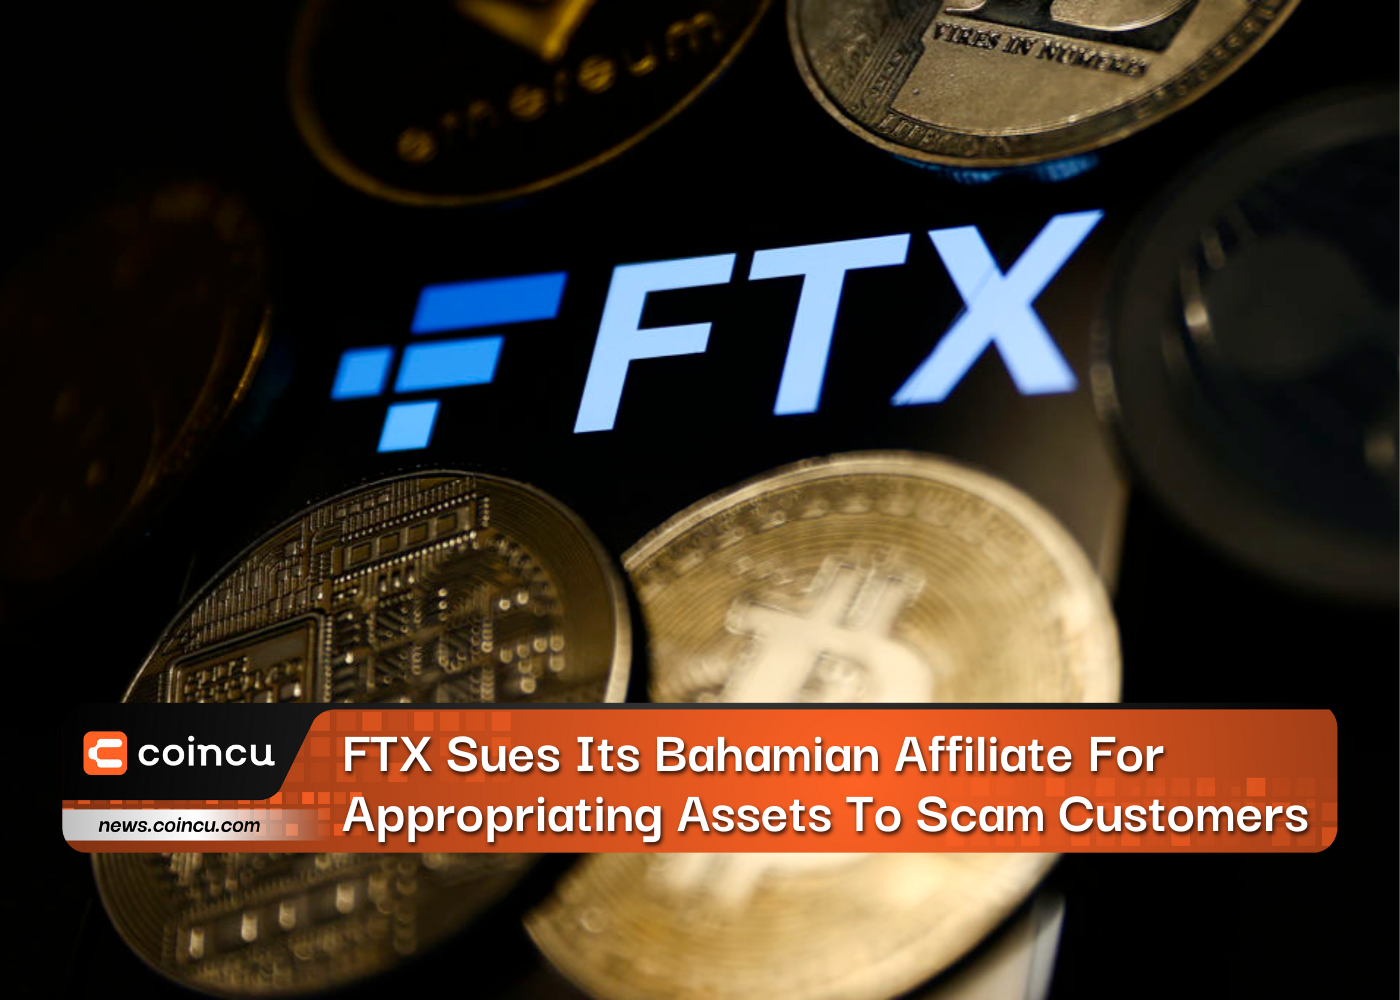 FTX Sues Its Bahamian Affiliate For Appropriating Assets To Scam Customers